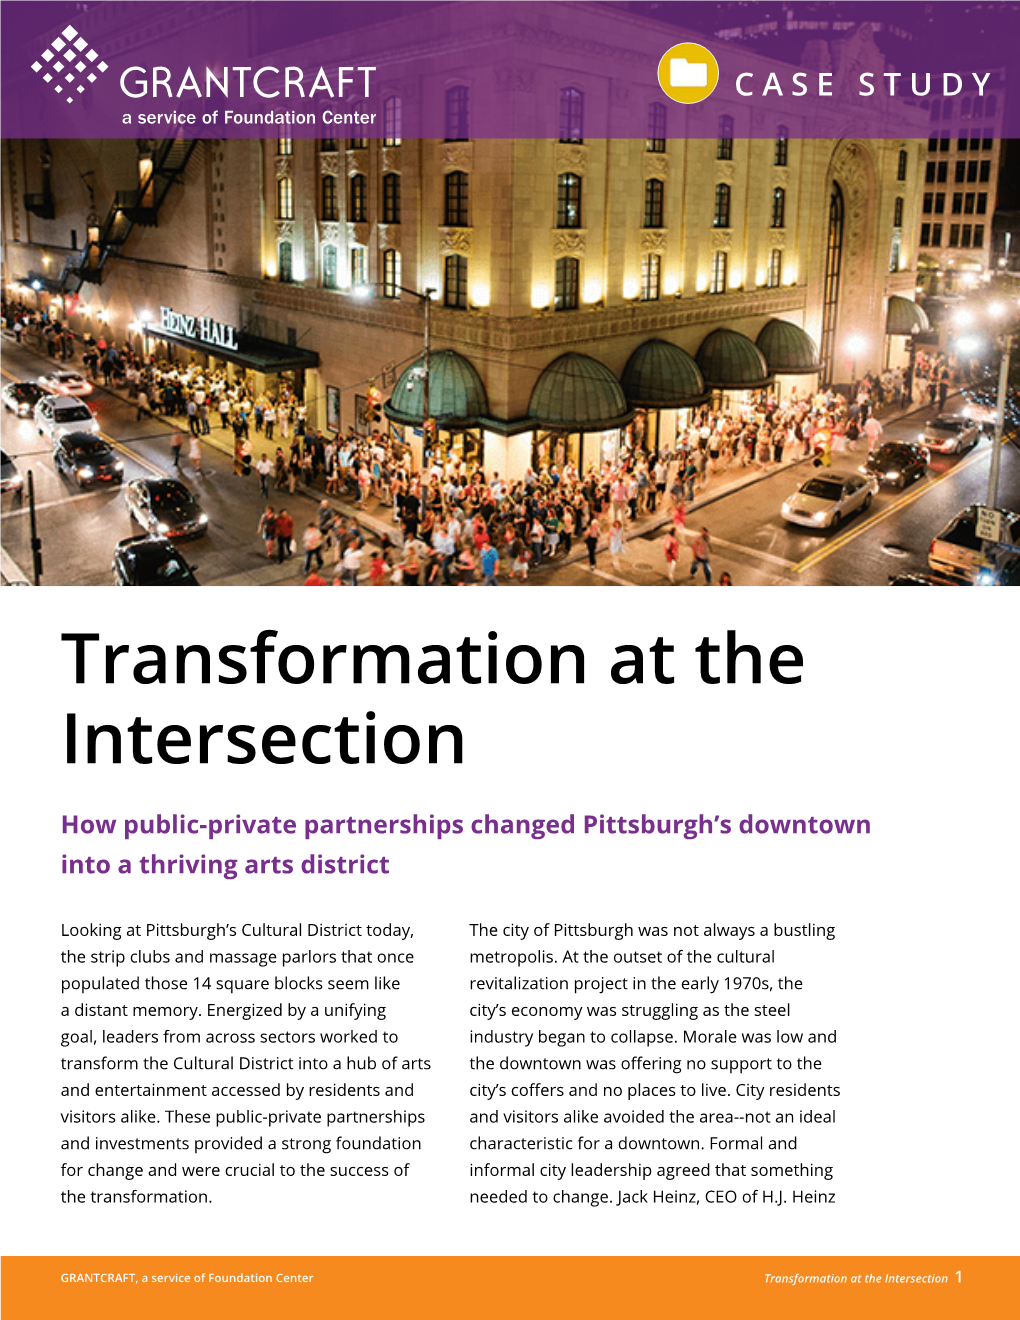 Transformation at the Intersection